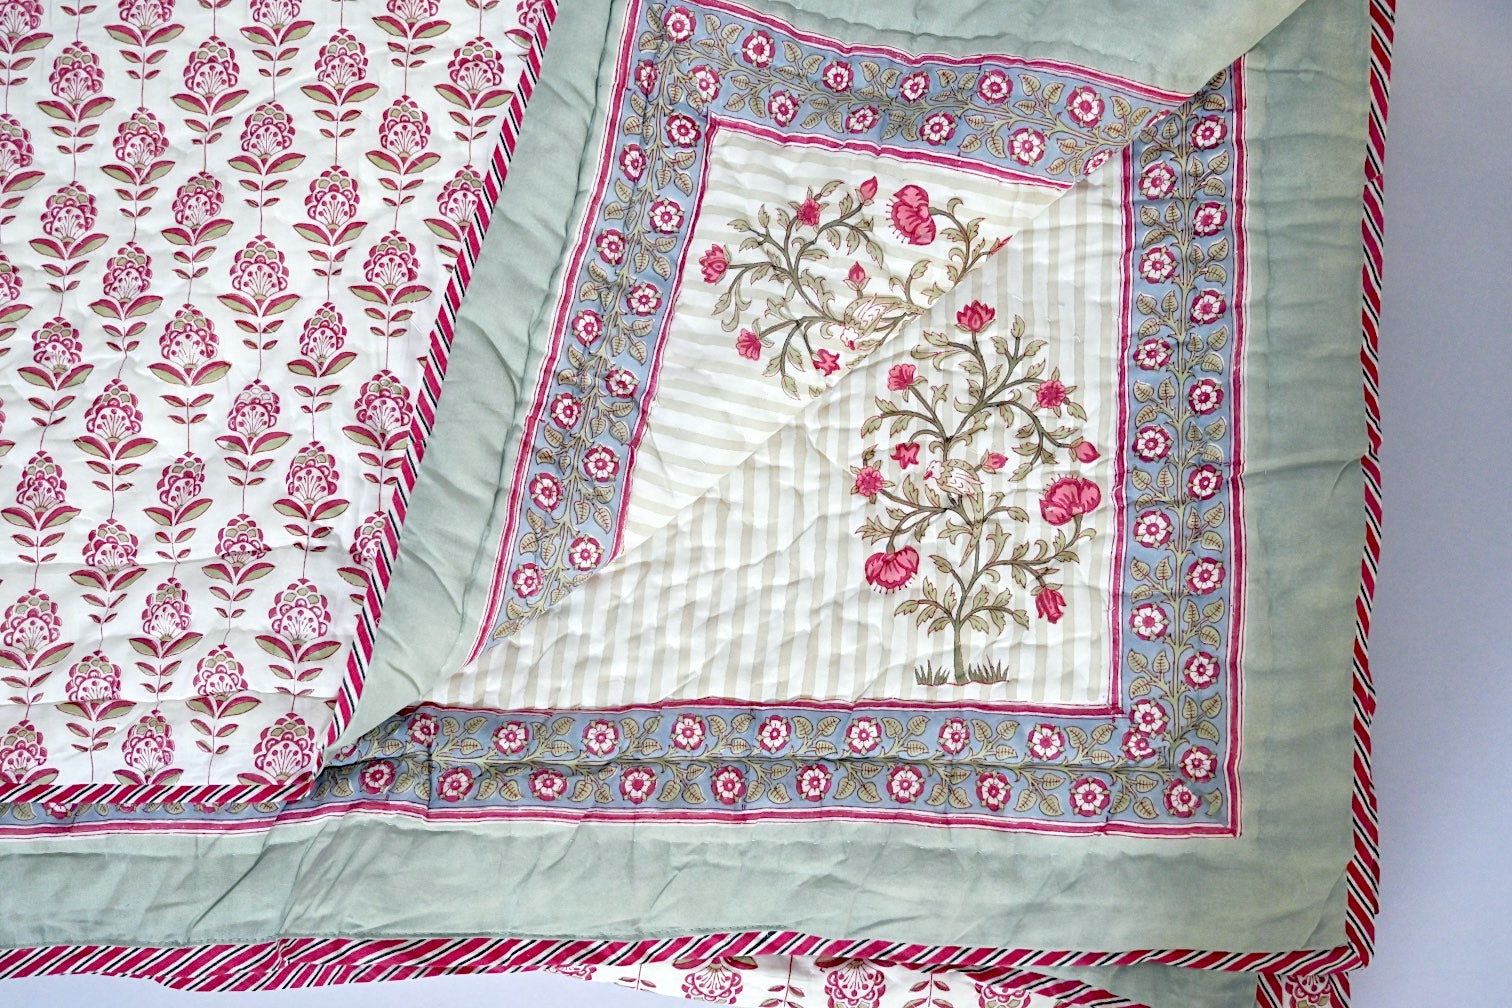 Sustainably made, Vintage Colors, Block Print Quilts from India